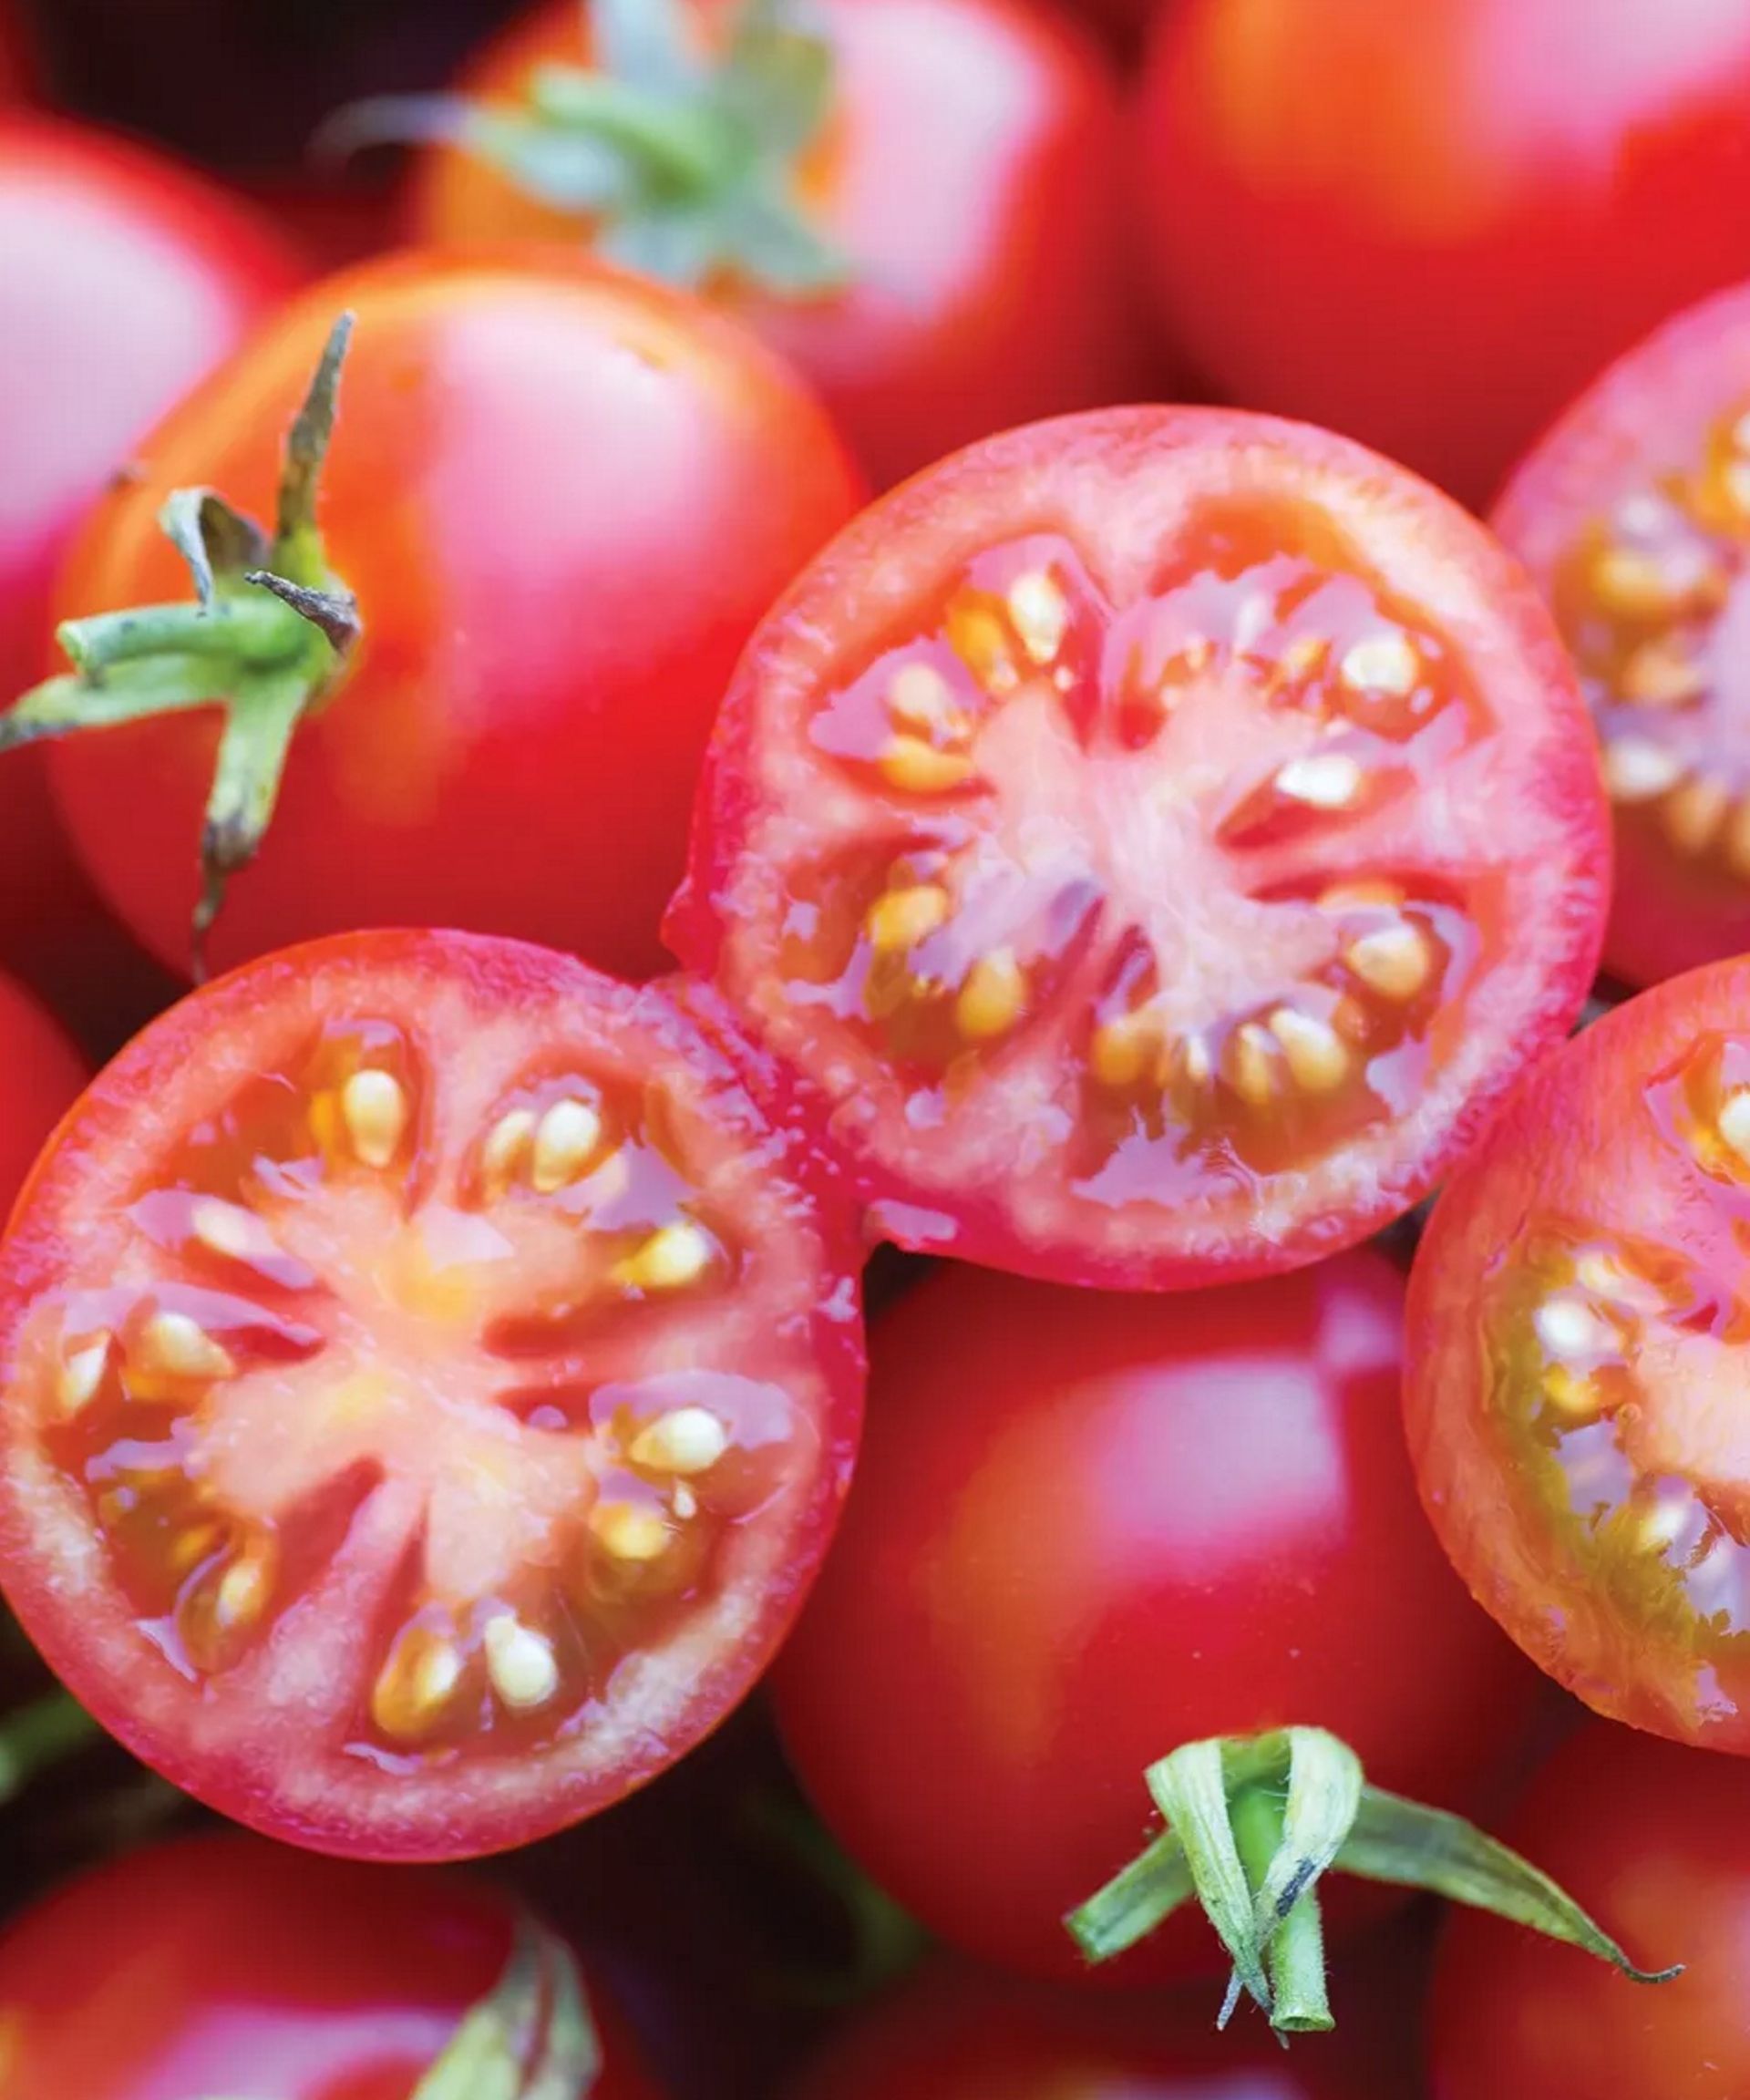 8 of the best tomato varieties to grow at home for bumper harvests and ...